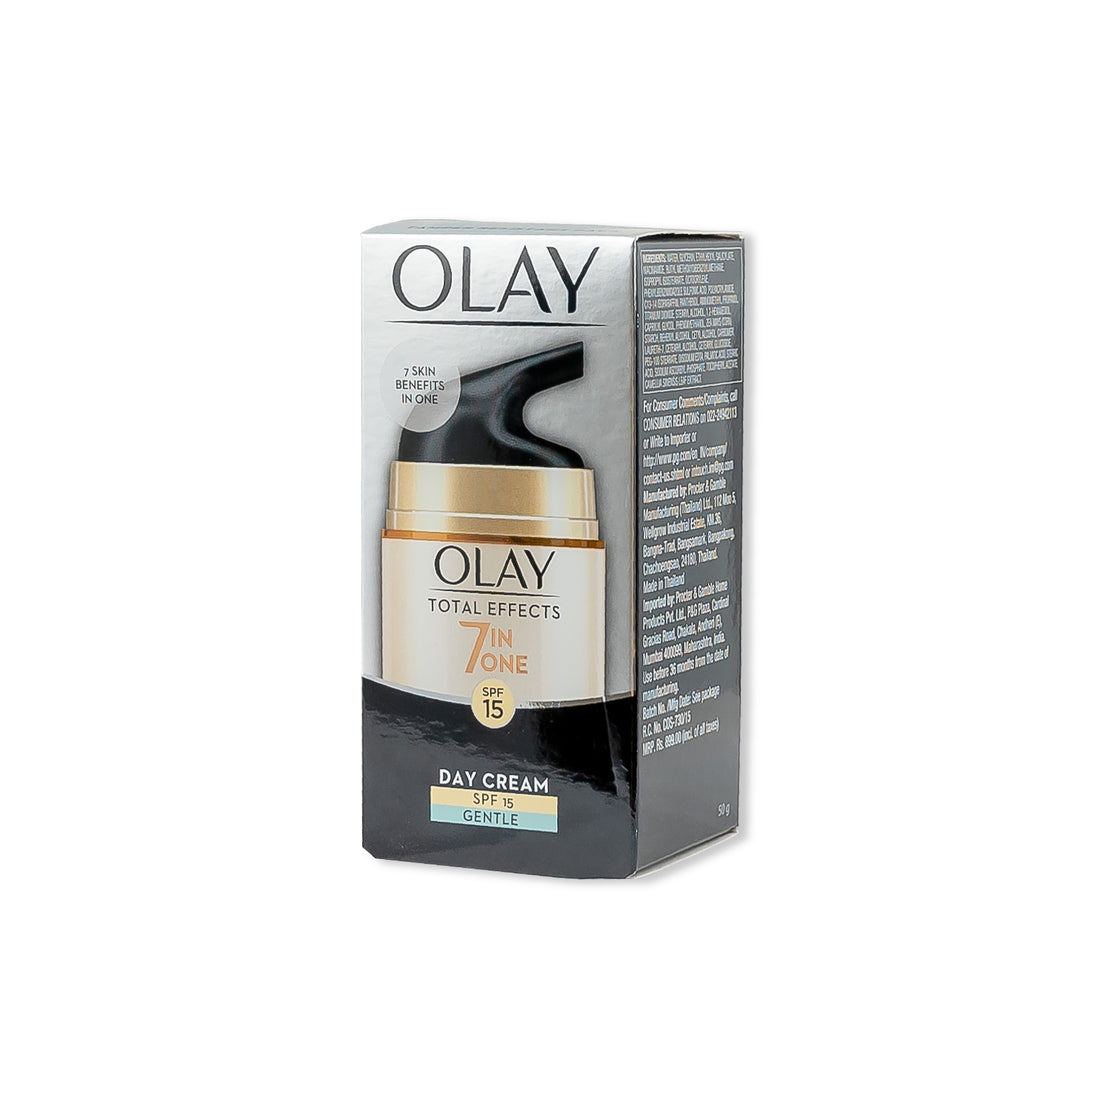 Olay Total Effects 7 in1 Day Cream SPF15 Gentle (50gm)